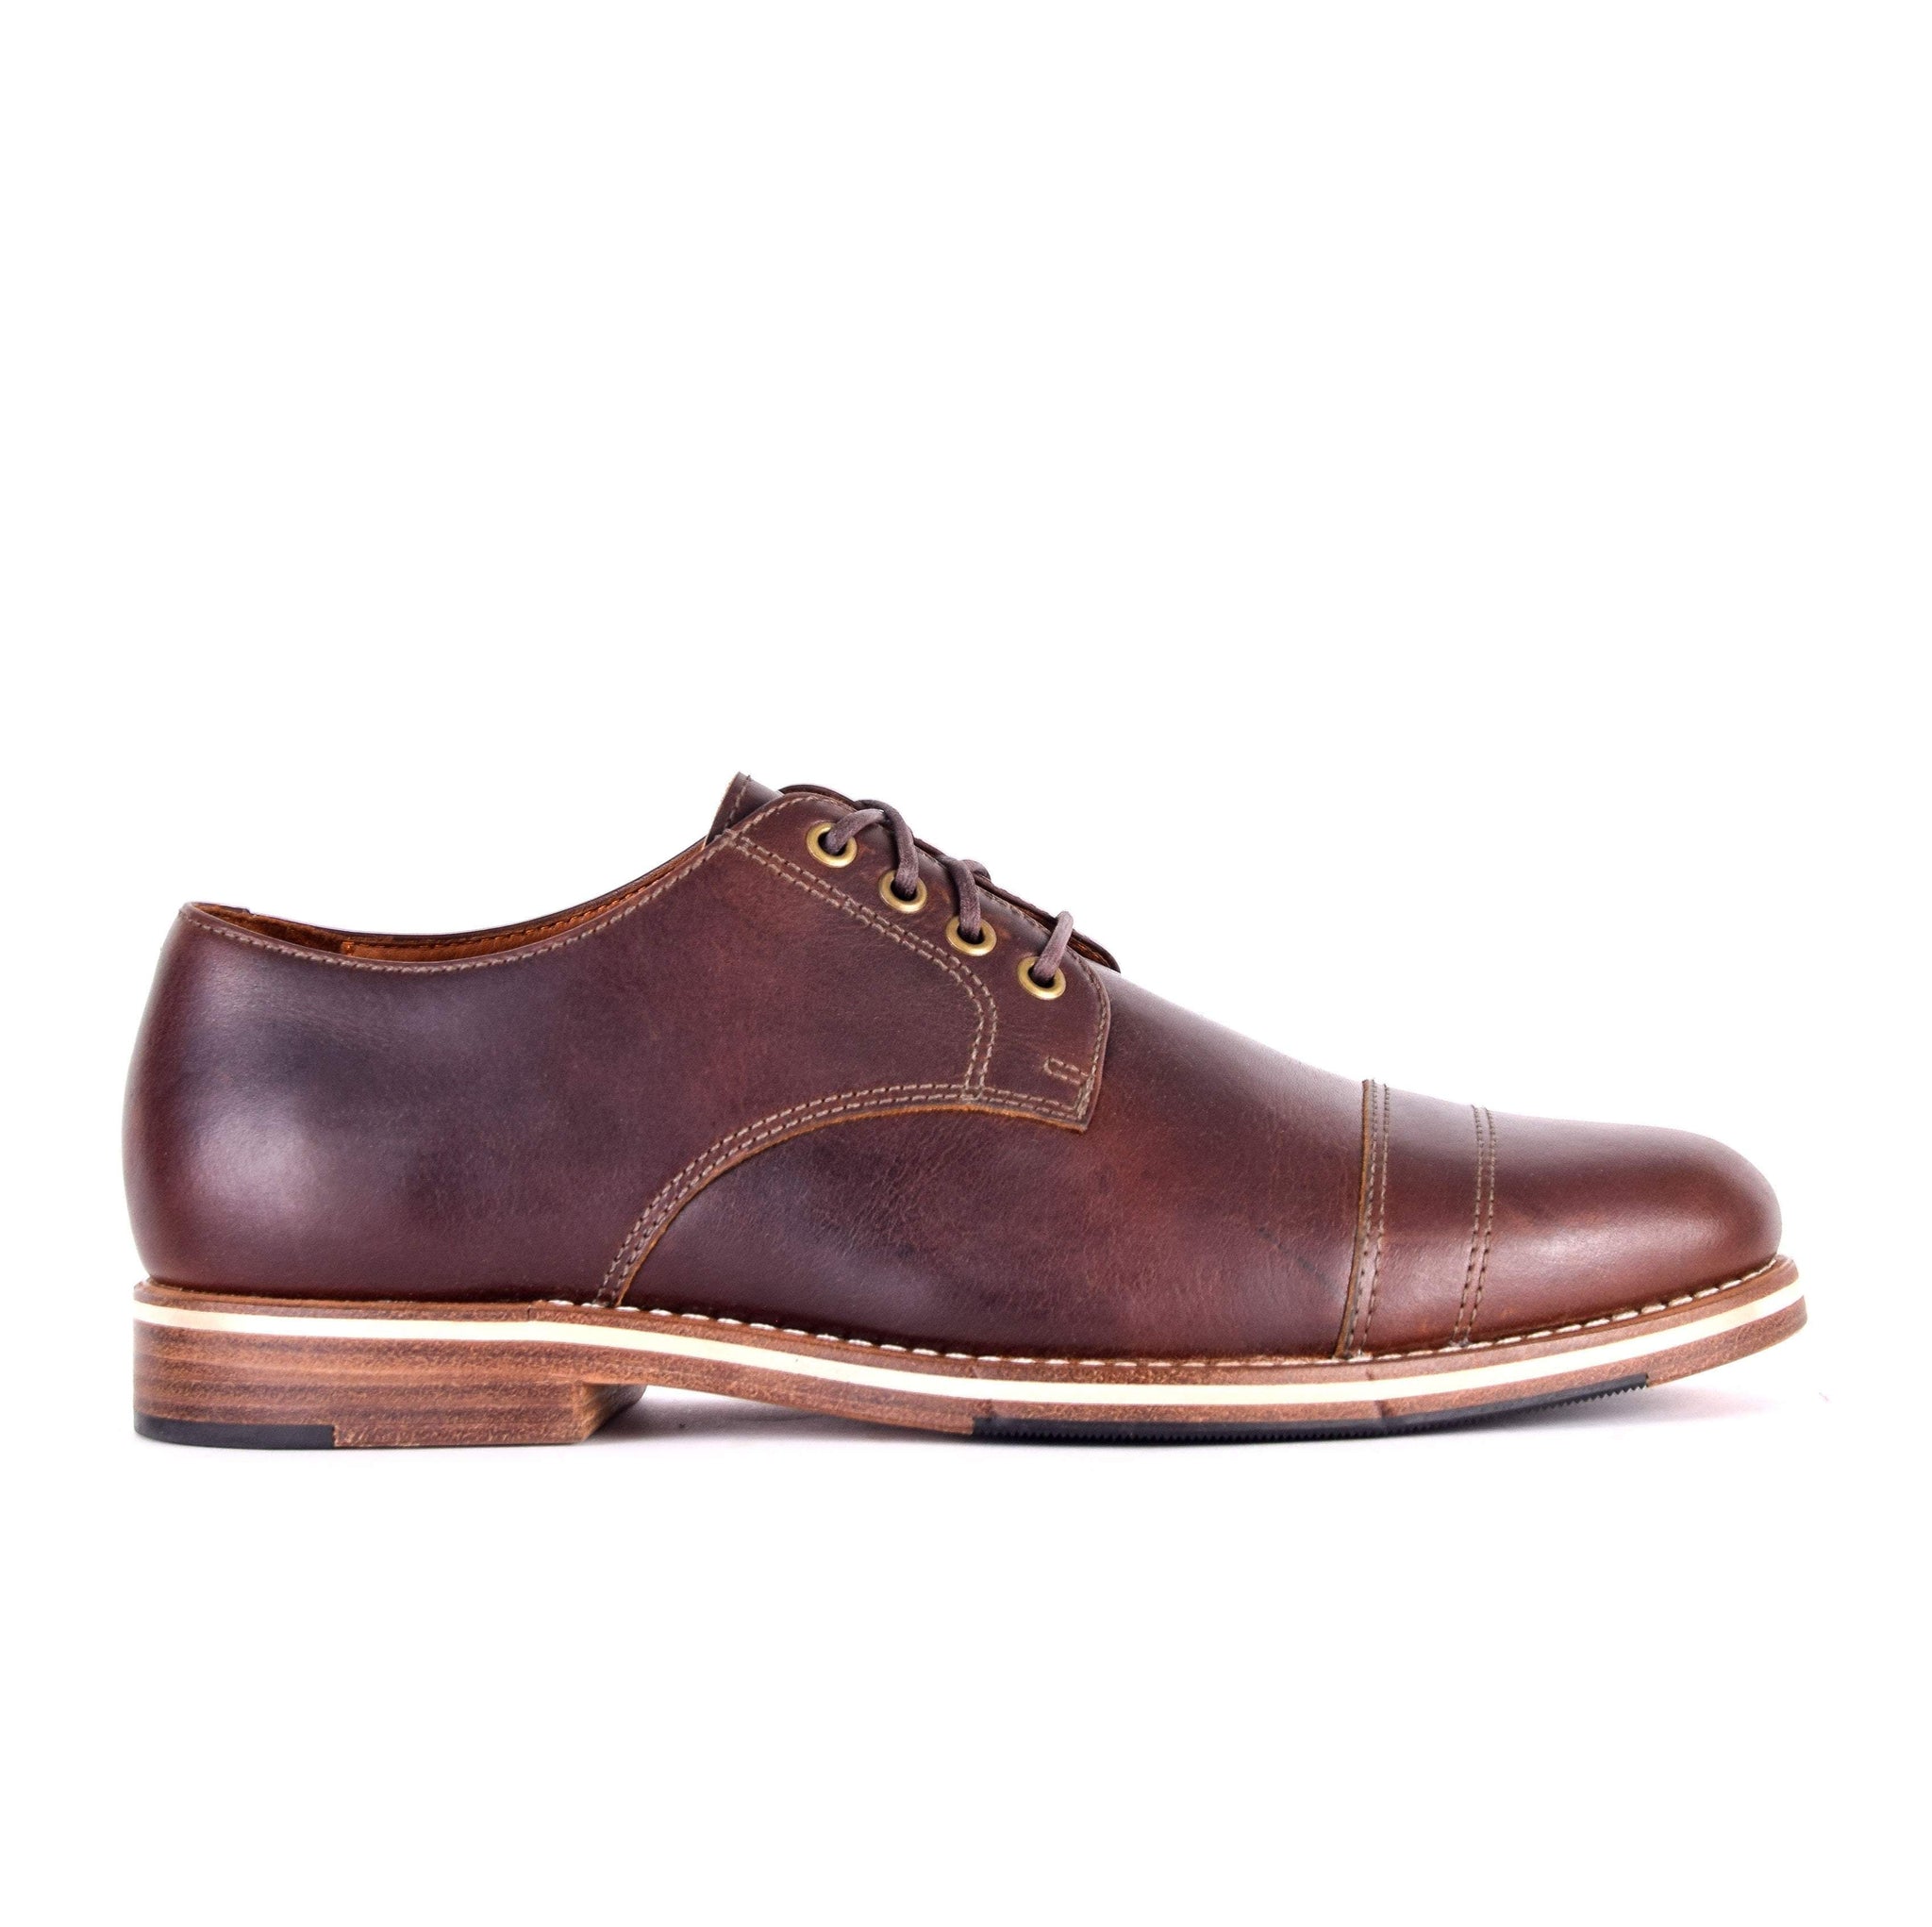 The Bradley Brown by HELM Boots